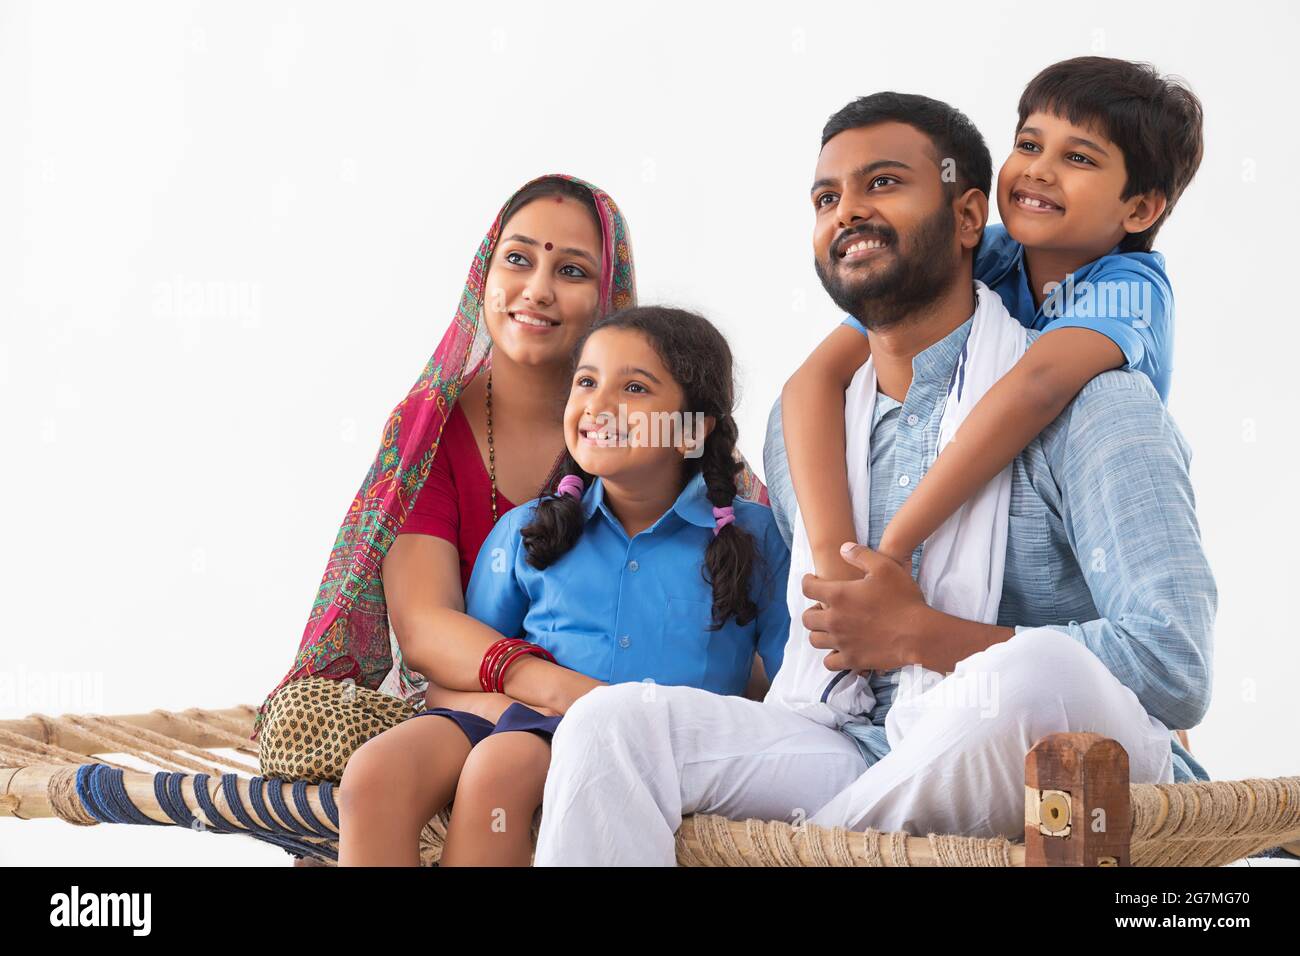 PORTRAIT OF A HAPPY RURAL FAMILY LOOKING AWAY FROM CAMERA AND POSING Stock Photo